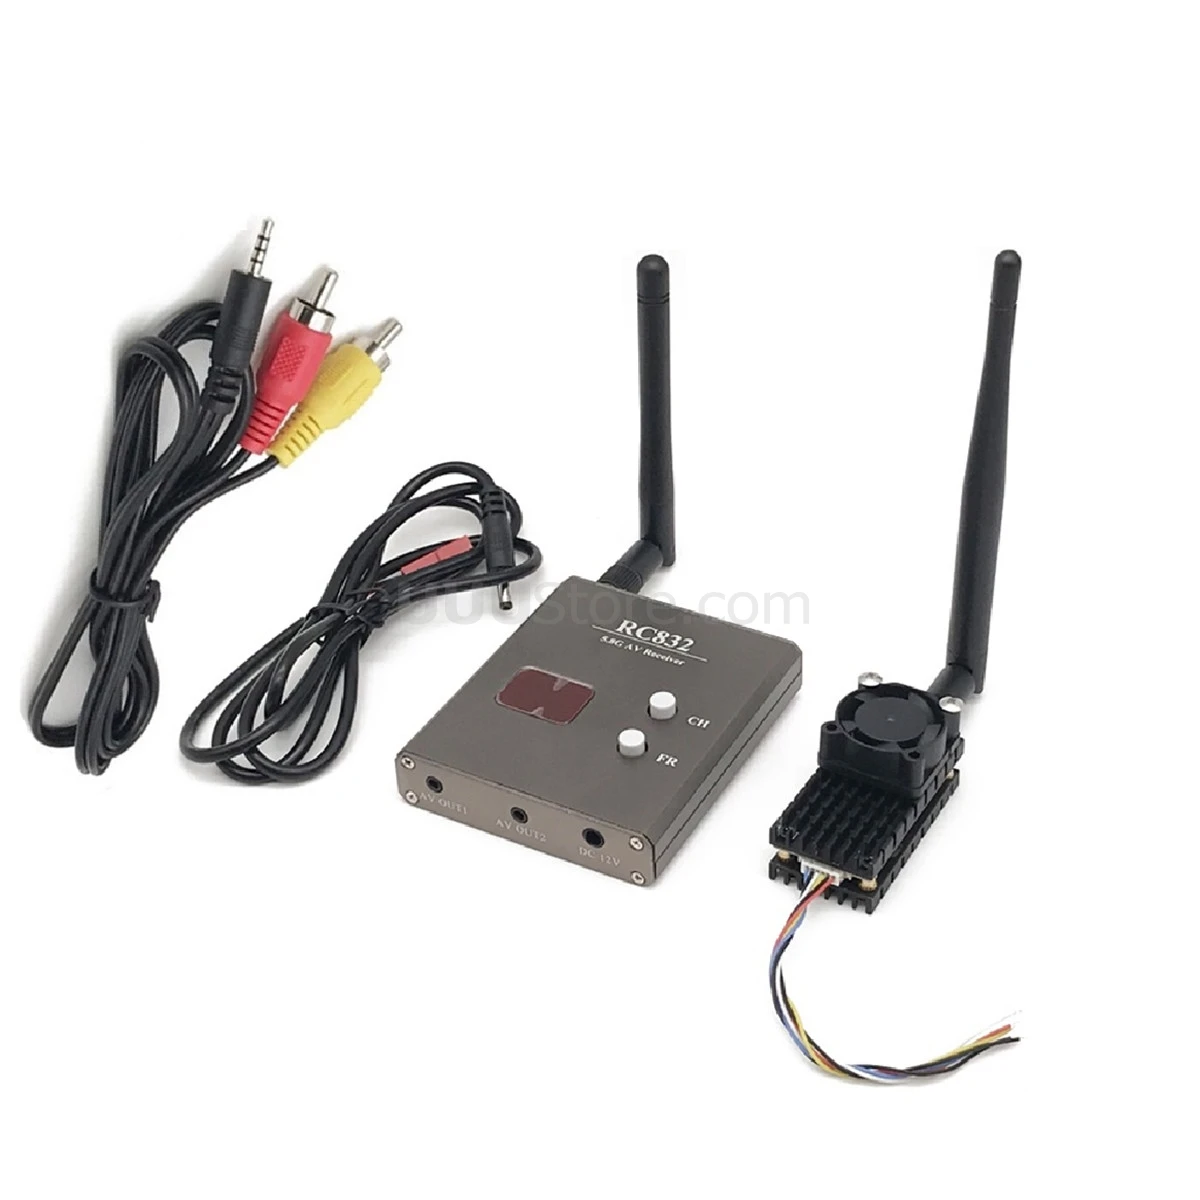 5.8G 5.8Ghz 2W 2000mW 8 Channels Wireless Audio Video FPV Transmitter TS582000 and RC805 Receiver Combo 1